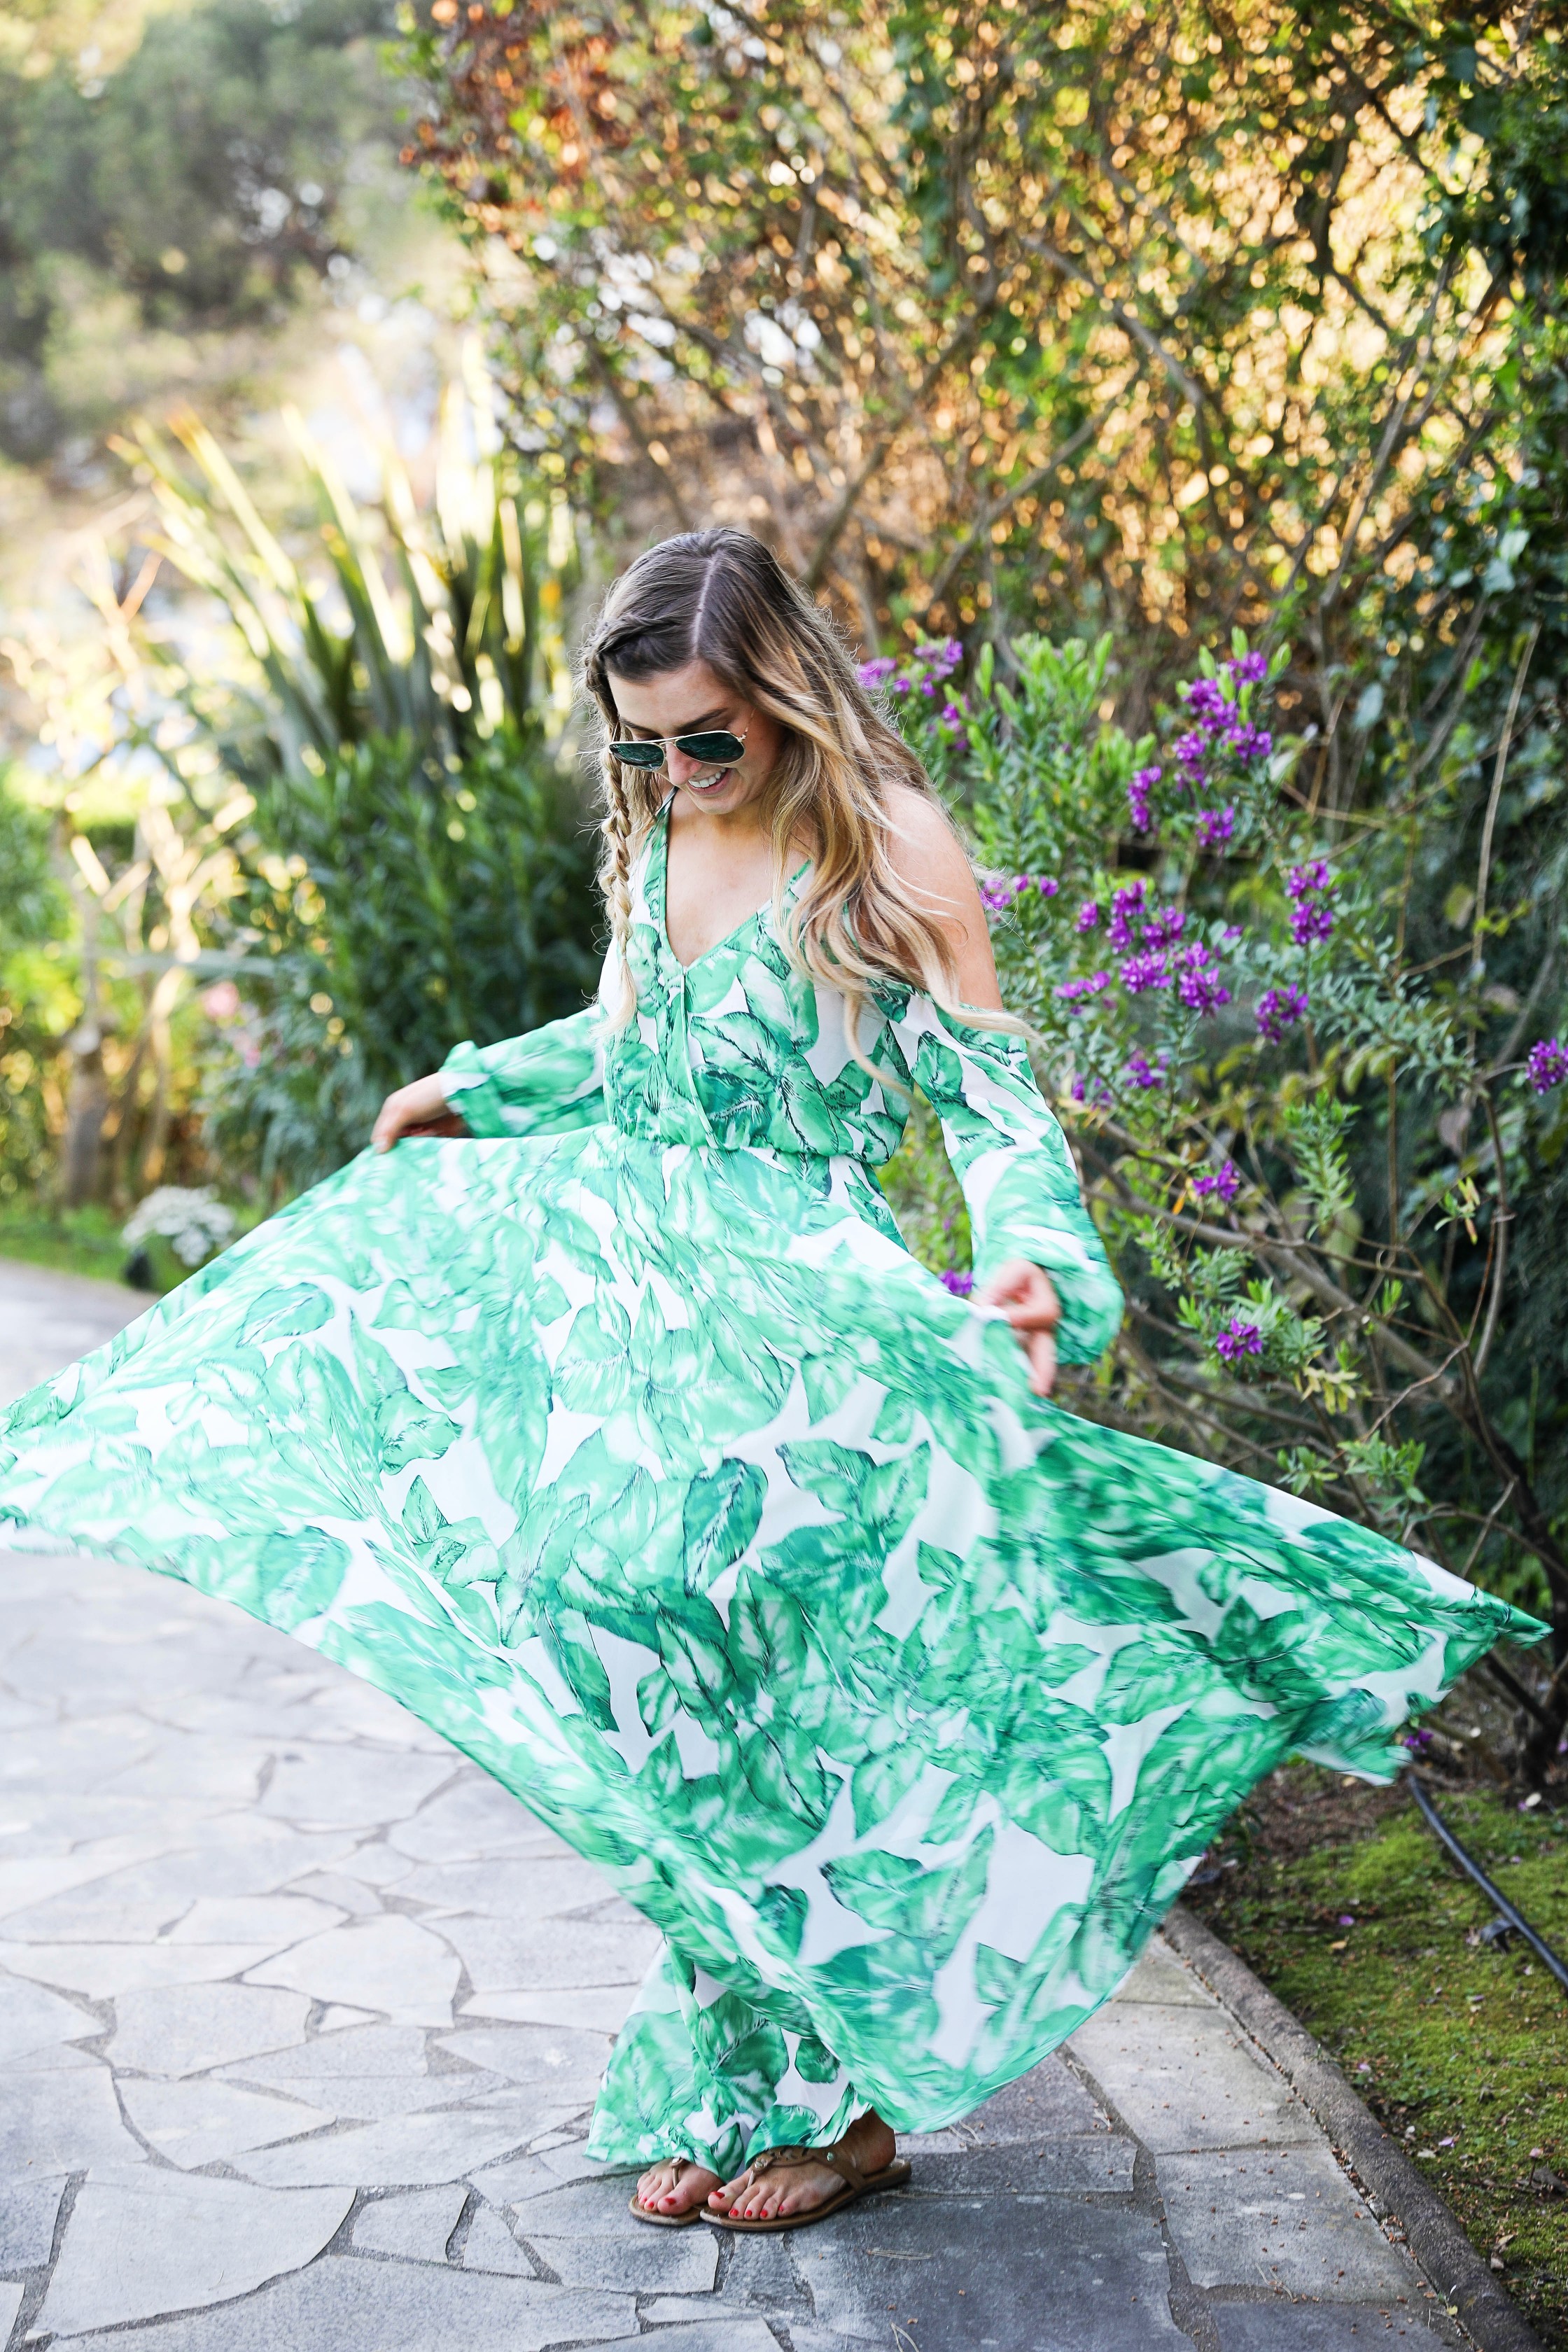 The perfect flowy island dress! I love the tropical print dress and it was a perfect outfit for Nice, France! By Lauren Lindmark on daily dose of charm dailydoseofcharm.com